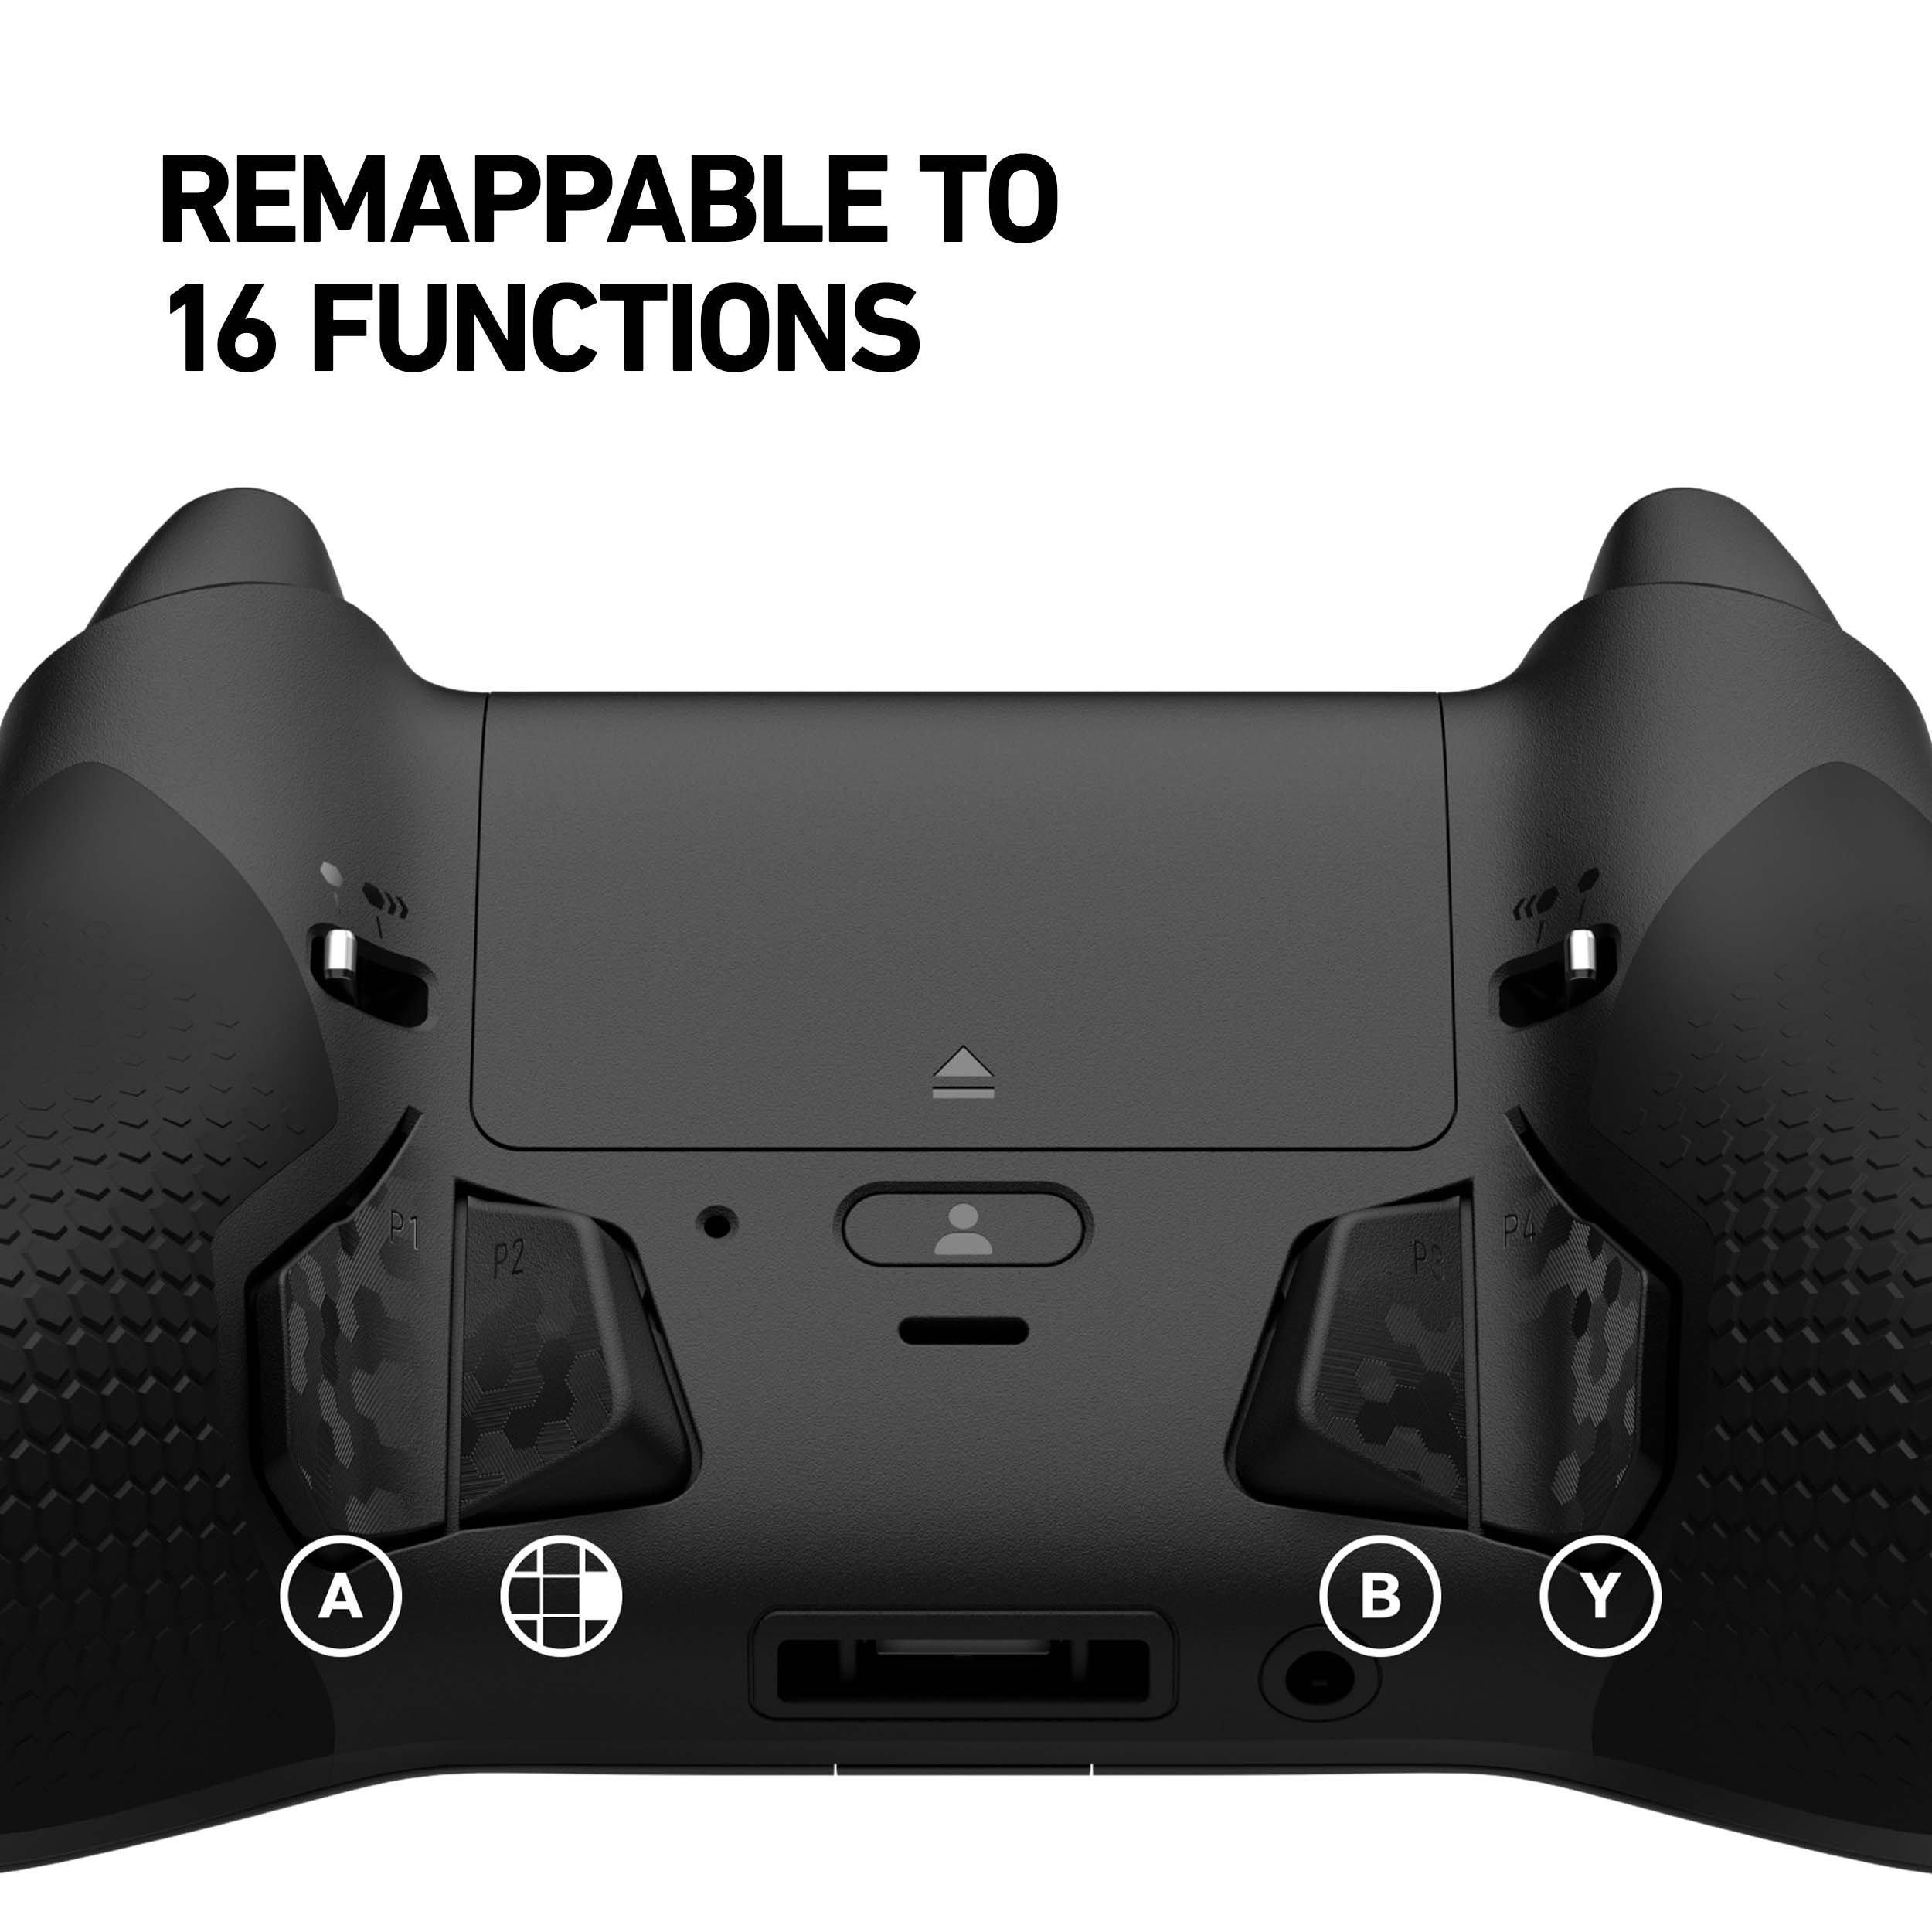 SCUF Instinct Pro Wireless Bluetooth Controller for Xbox Series X and S